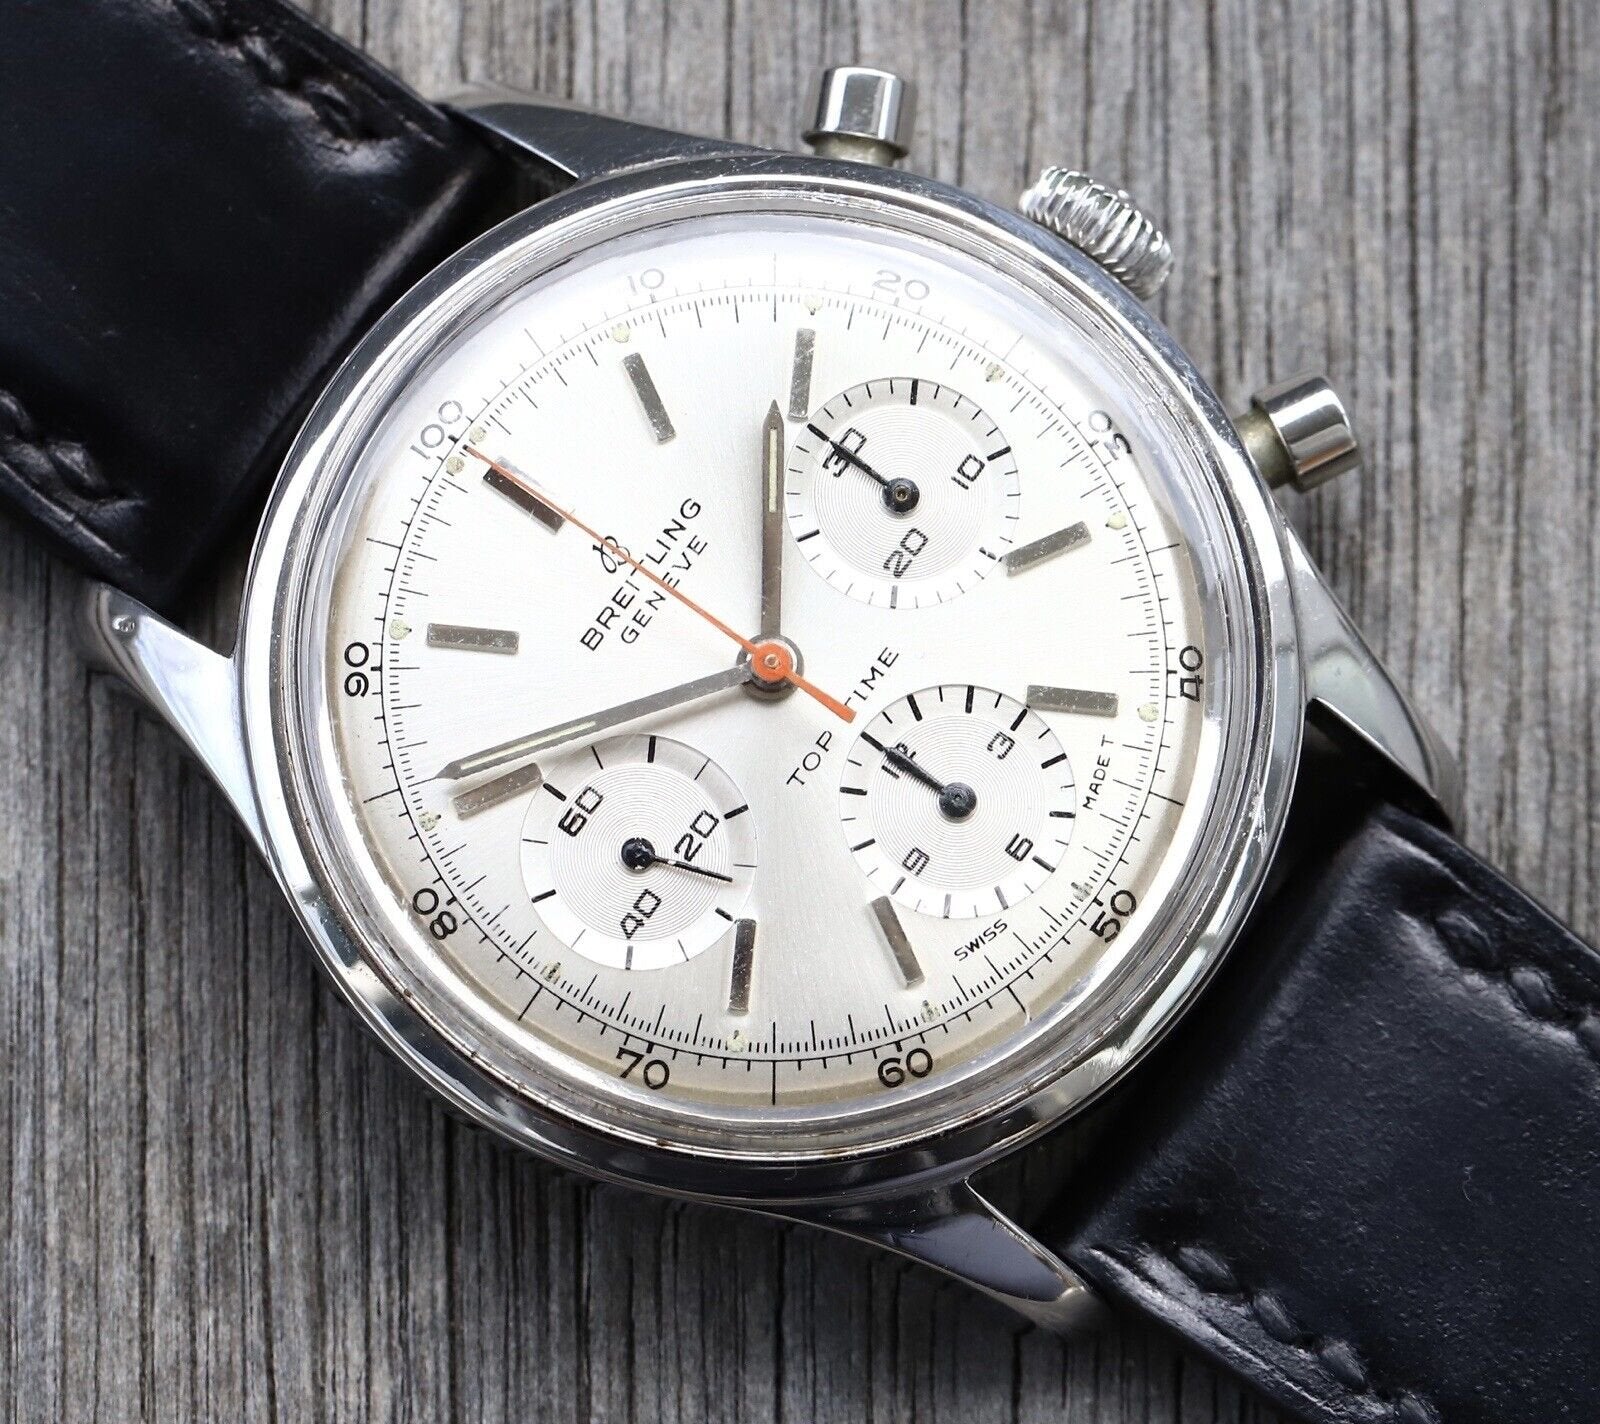 Breitling_Top_Time_Reference_810_-_1960_27s_Watch_Vault_02.jpg